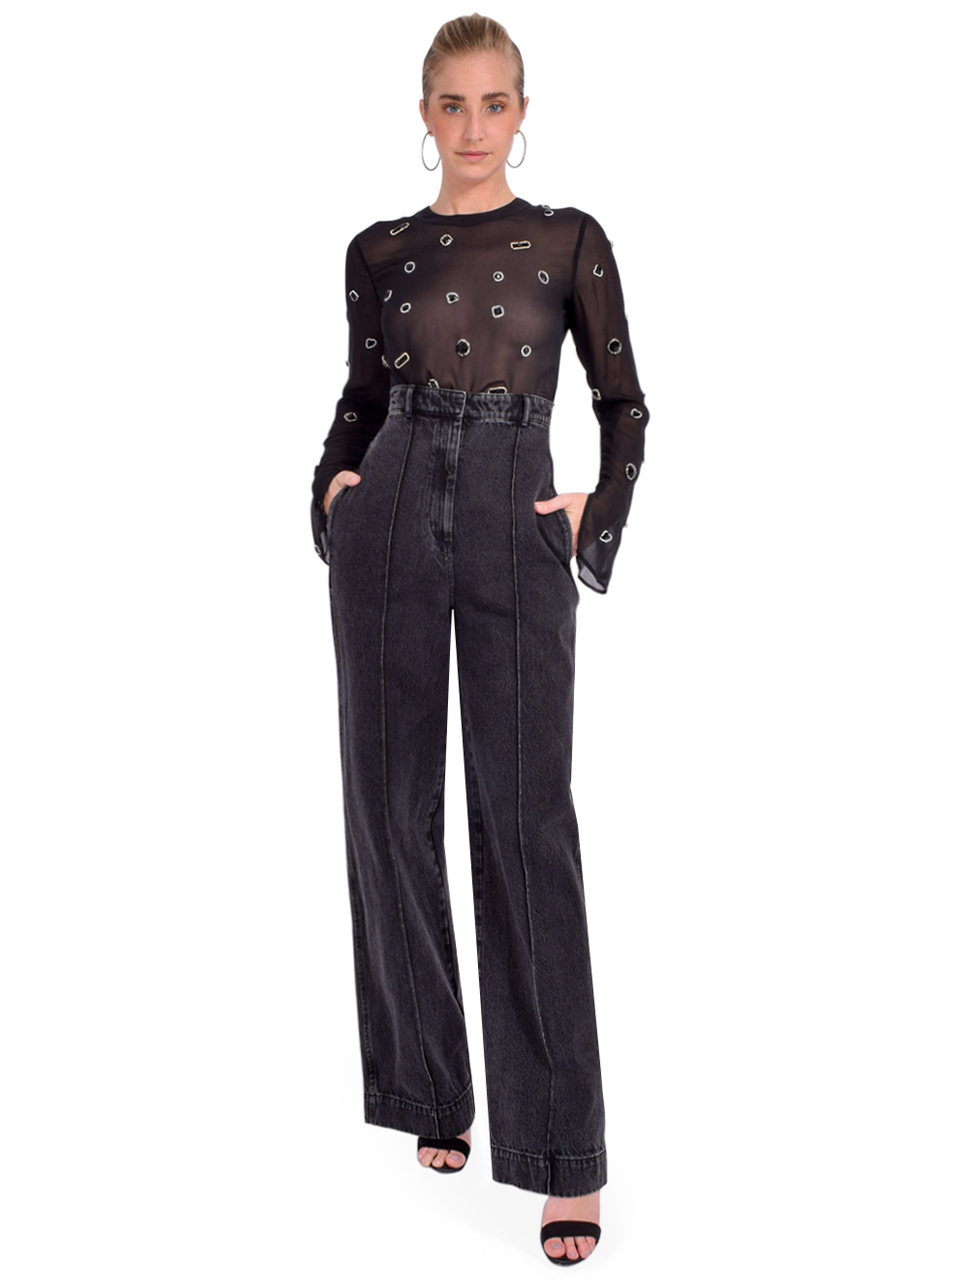 3.1 Phillip Lim Halo Embroidered Chiffon Long Sleeve Top in Black Full Outfit 